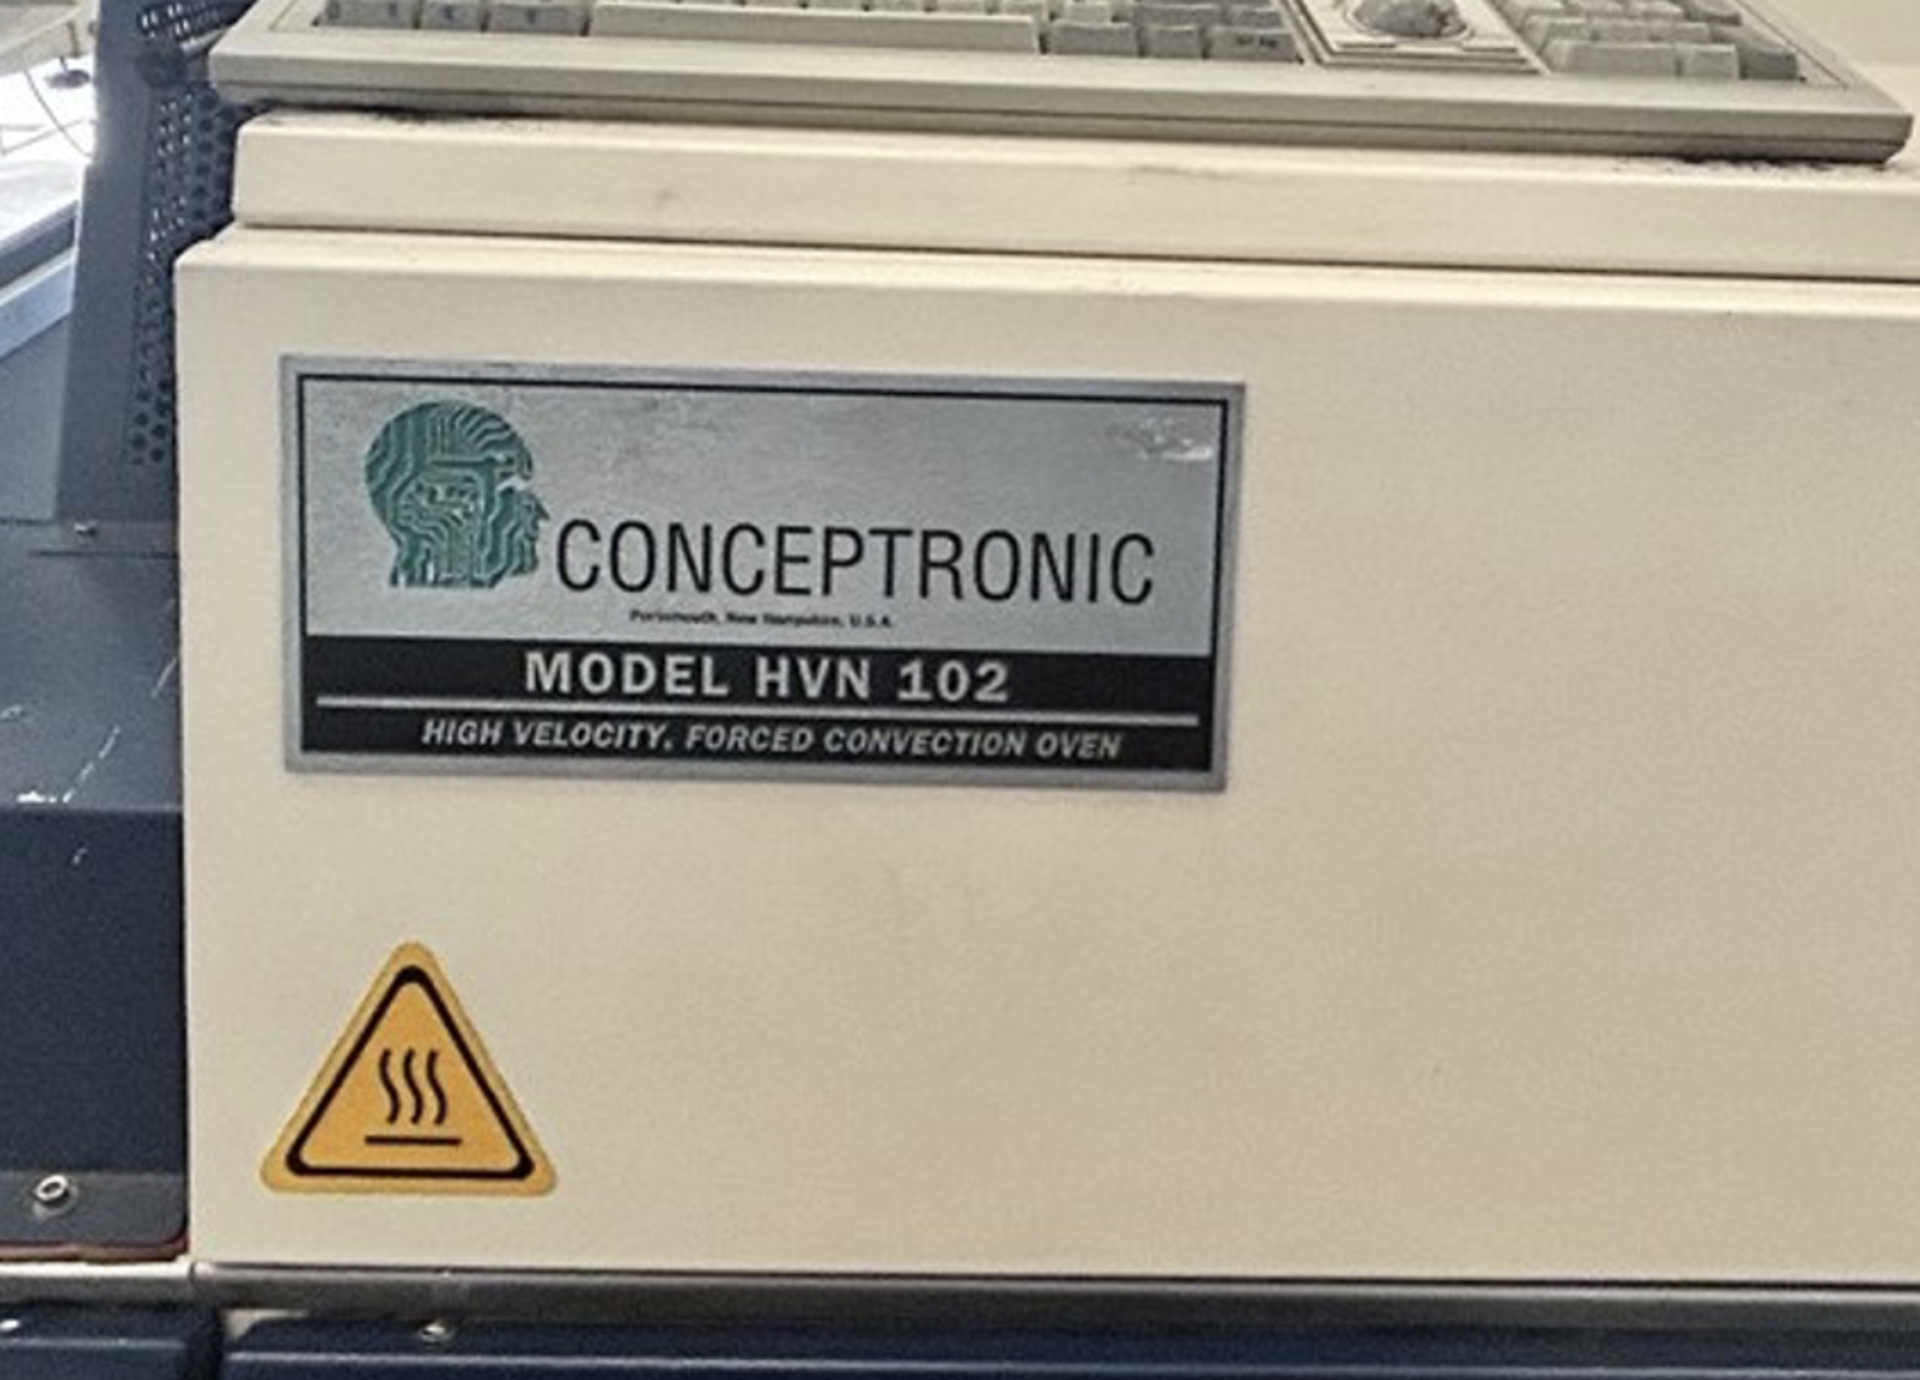 NO RESERVE - Conceptronic Conveyor Oven, HVN 102 - Image 2 of 2